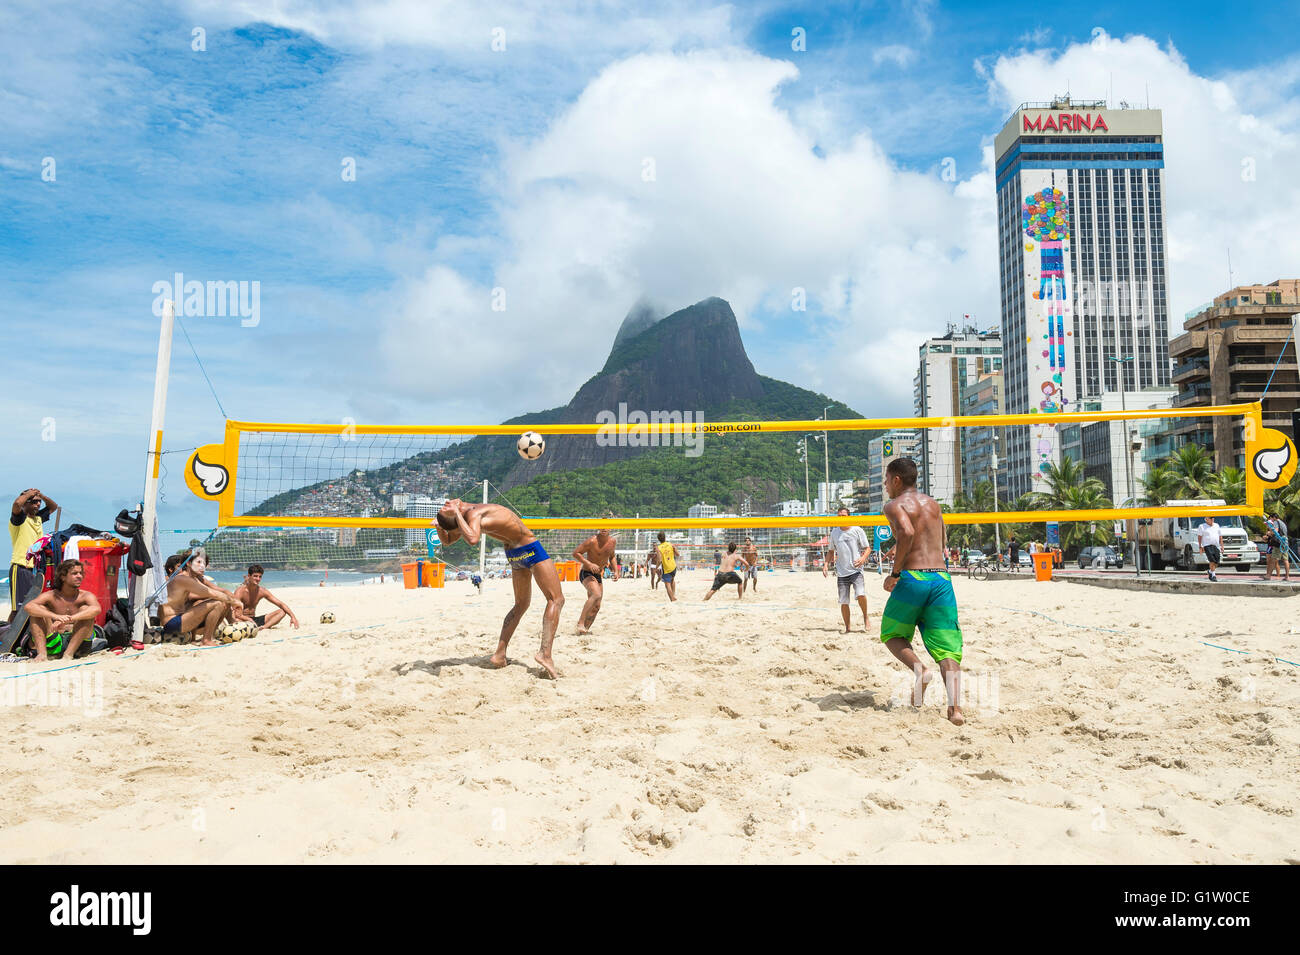 RIO DE JANEIRO - MARCH 17, 2016: Young Brazilians play a game of futevolei/footvolley, a sport combining football and volleyball Stock Photo